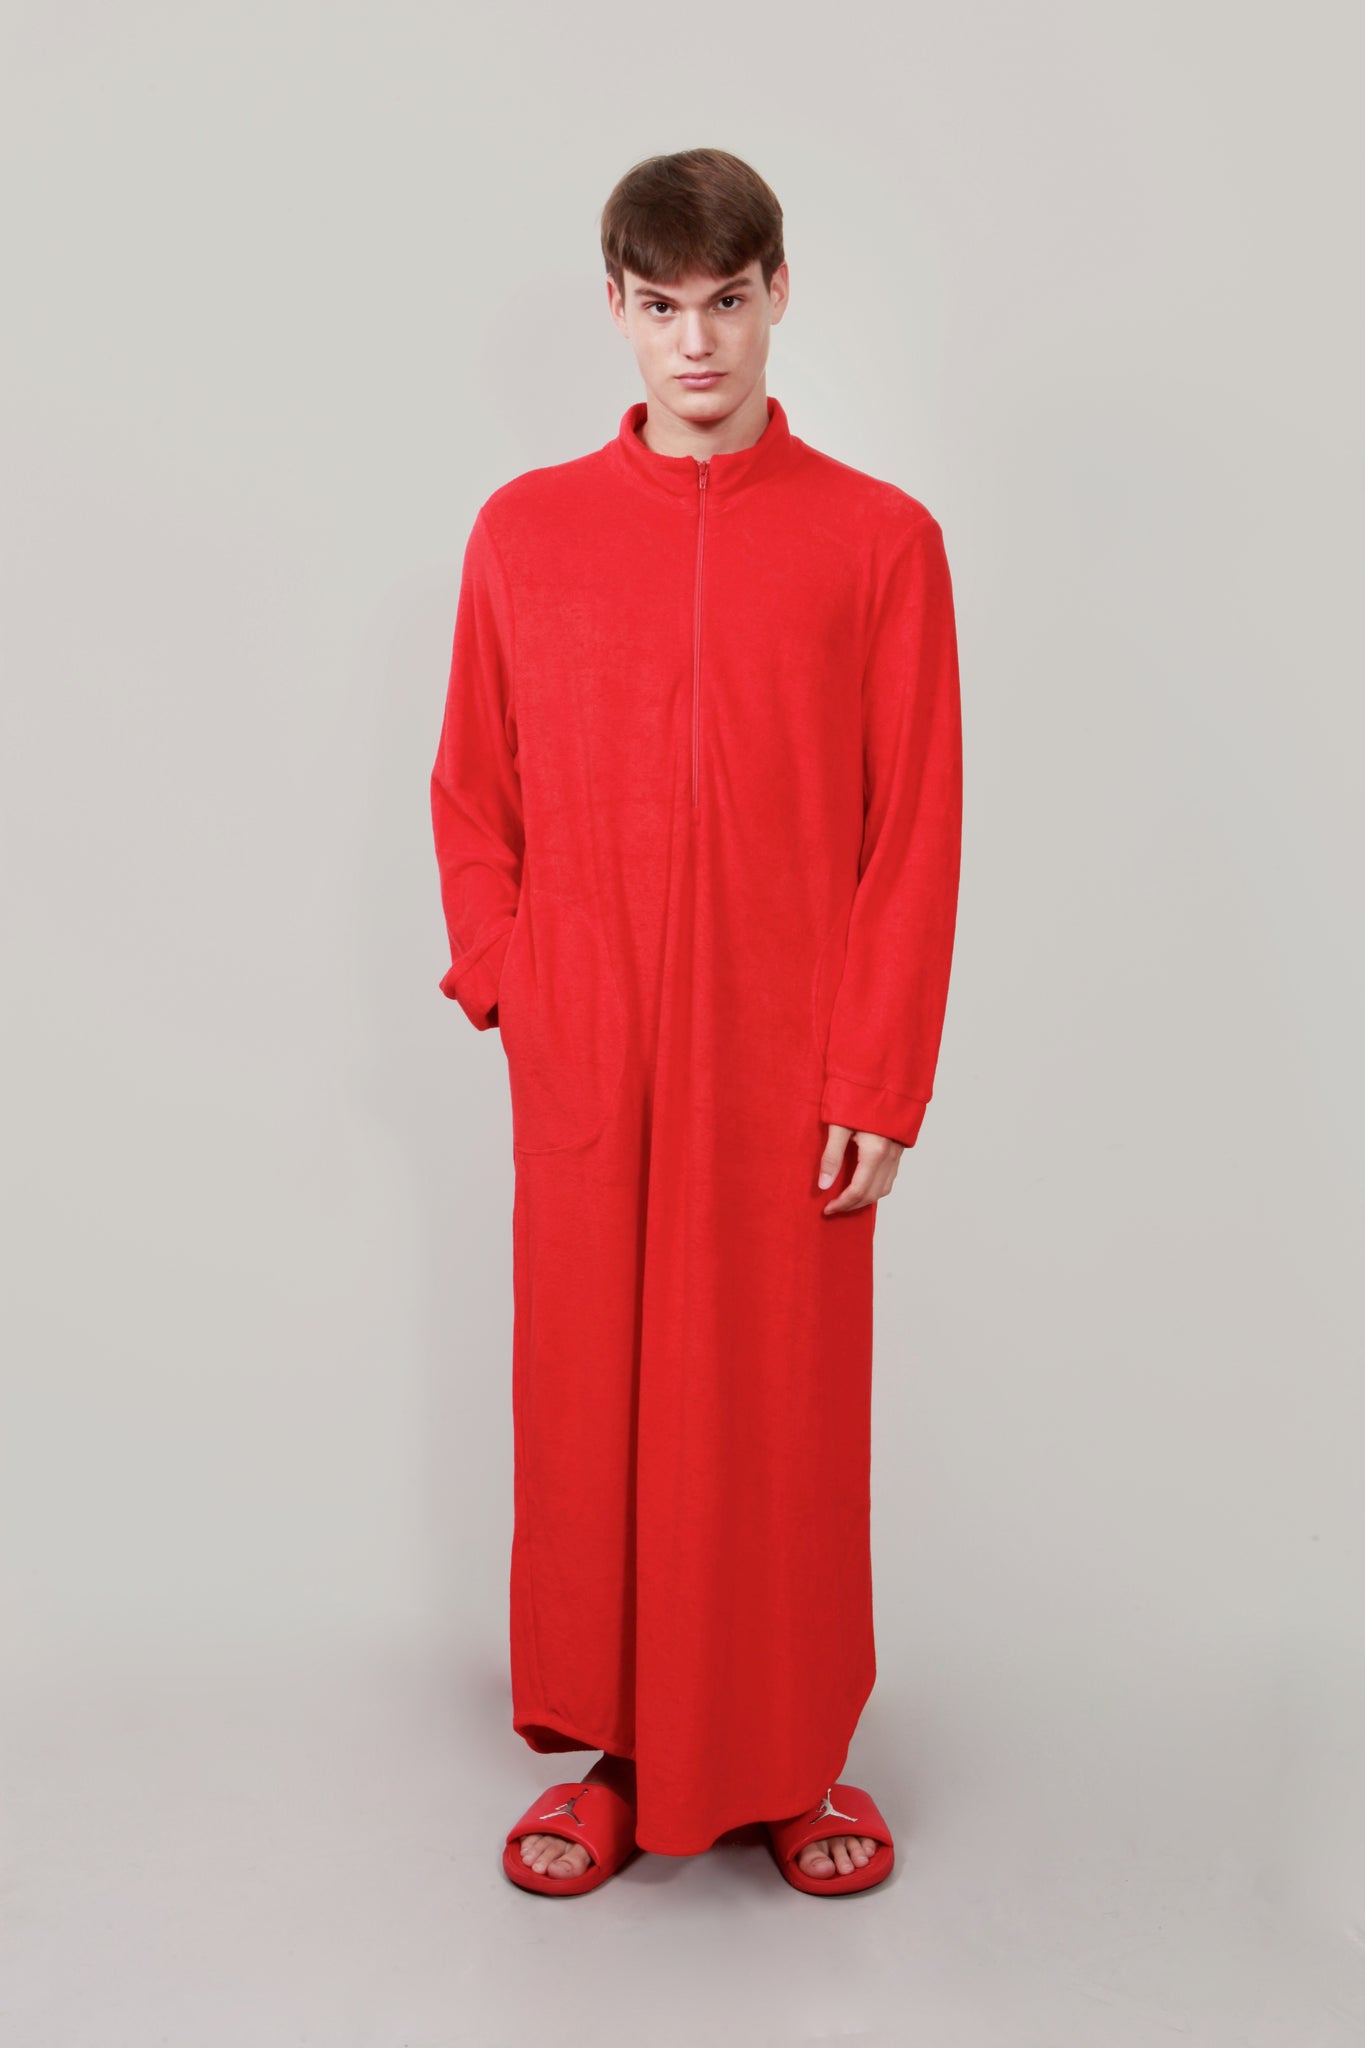 Kaftan Liberall. Style: Donnie - unisex, long sleeve, red. Photo by Eva Roefs.